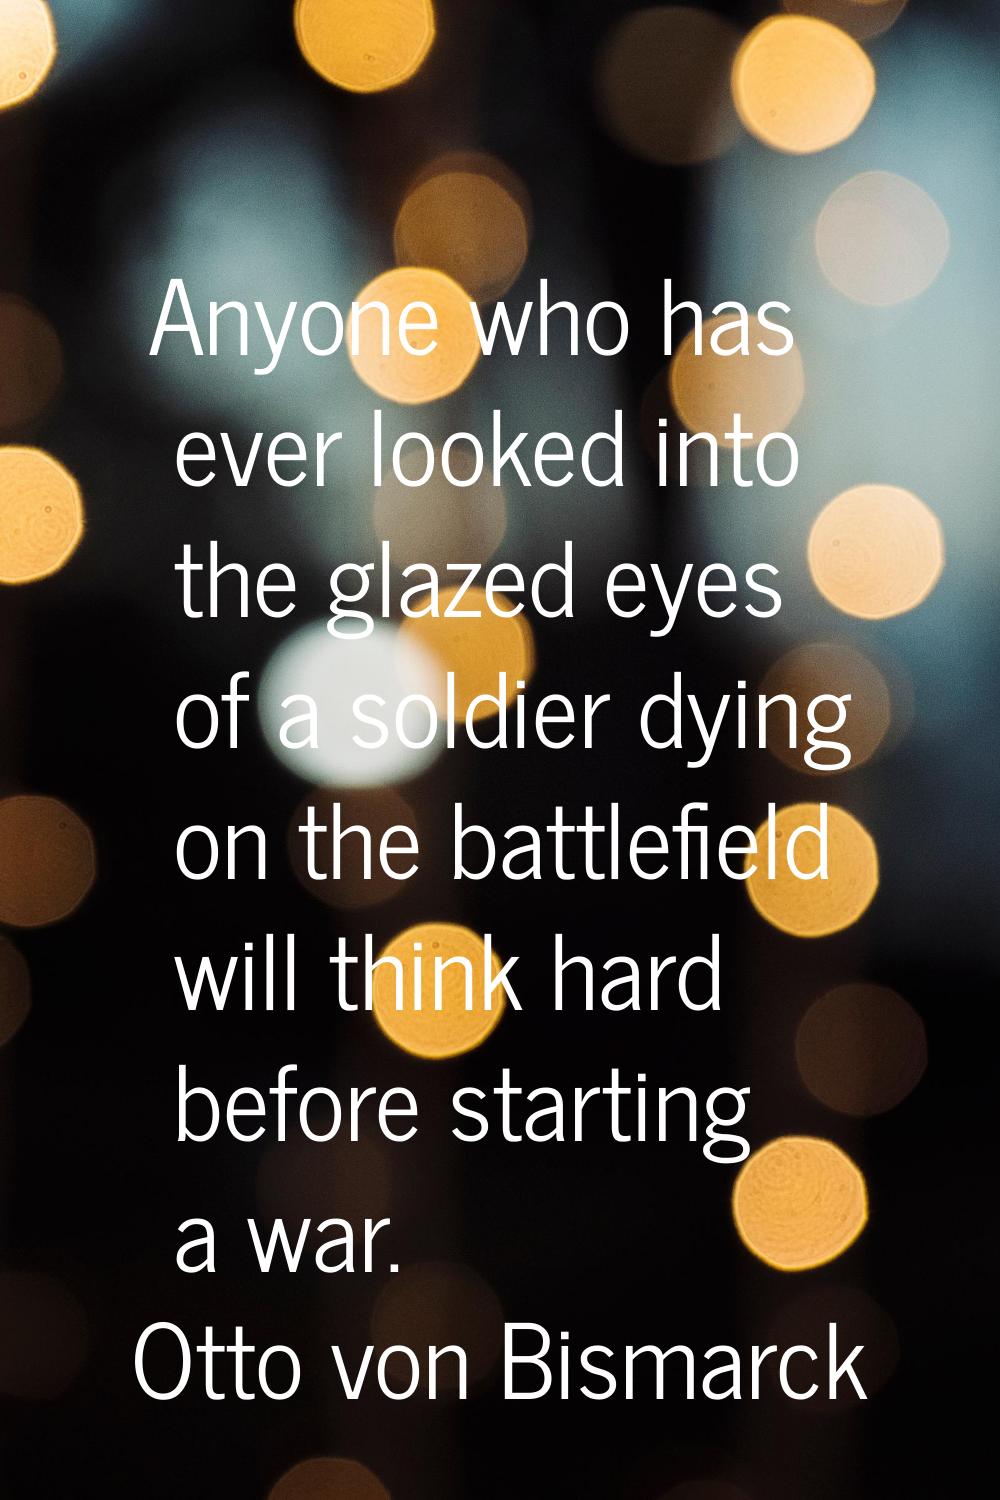 Anyone who has ever looked into the glazed eyes of a soldier dying on the battlefield will think ha